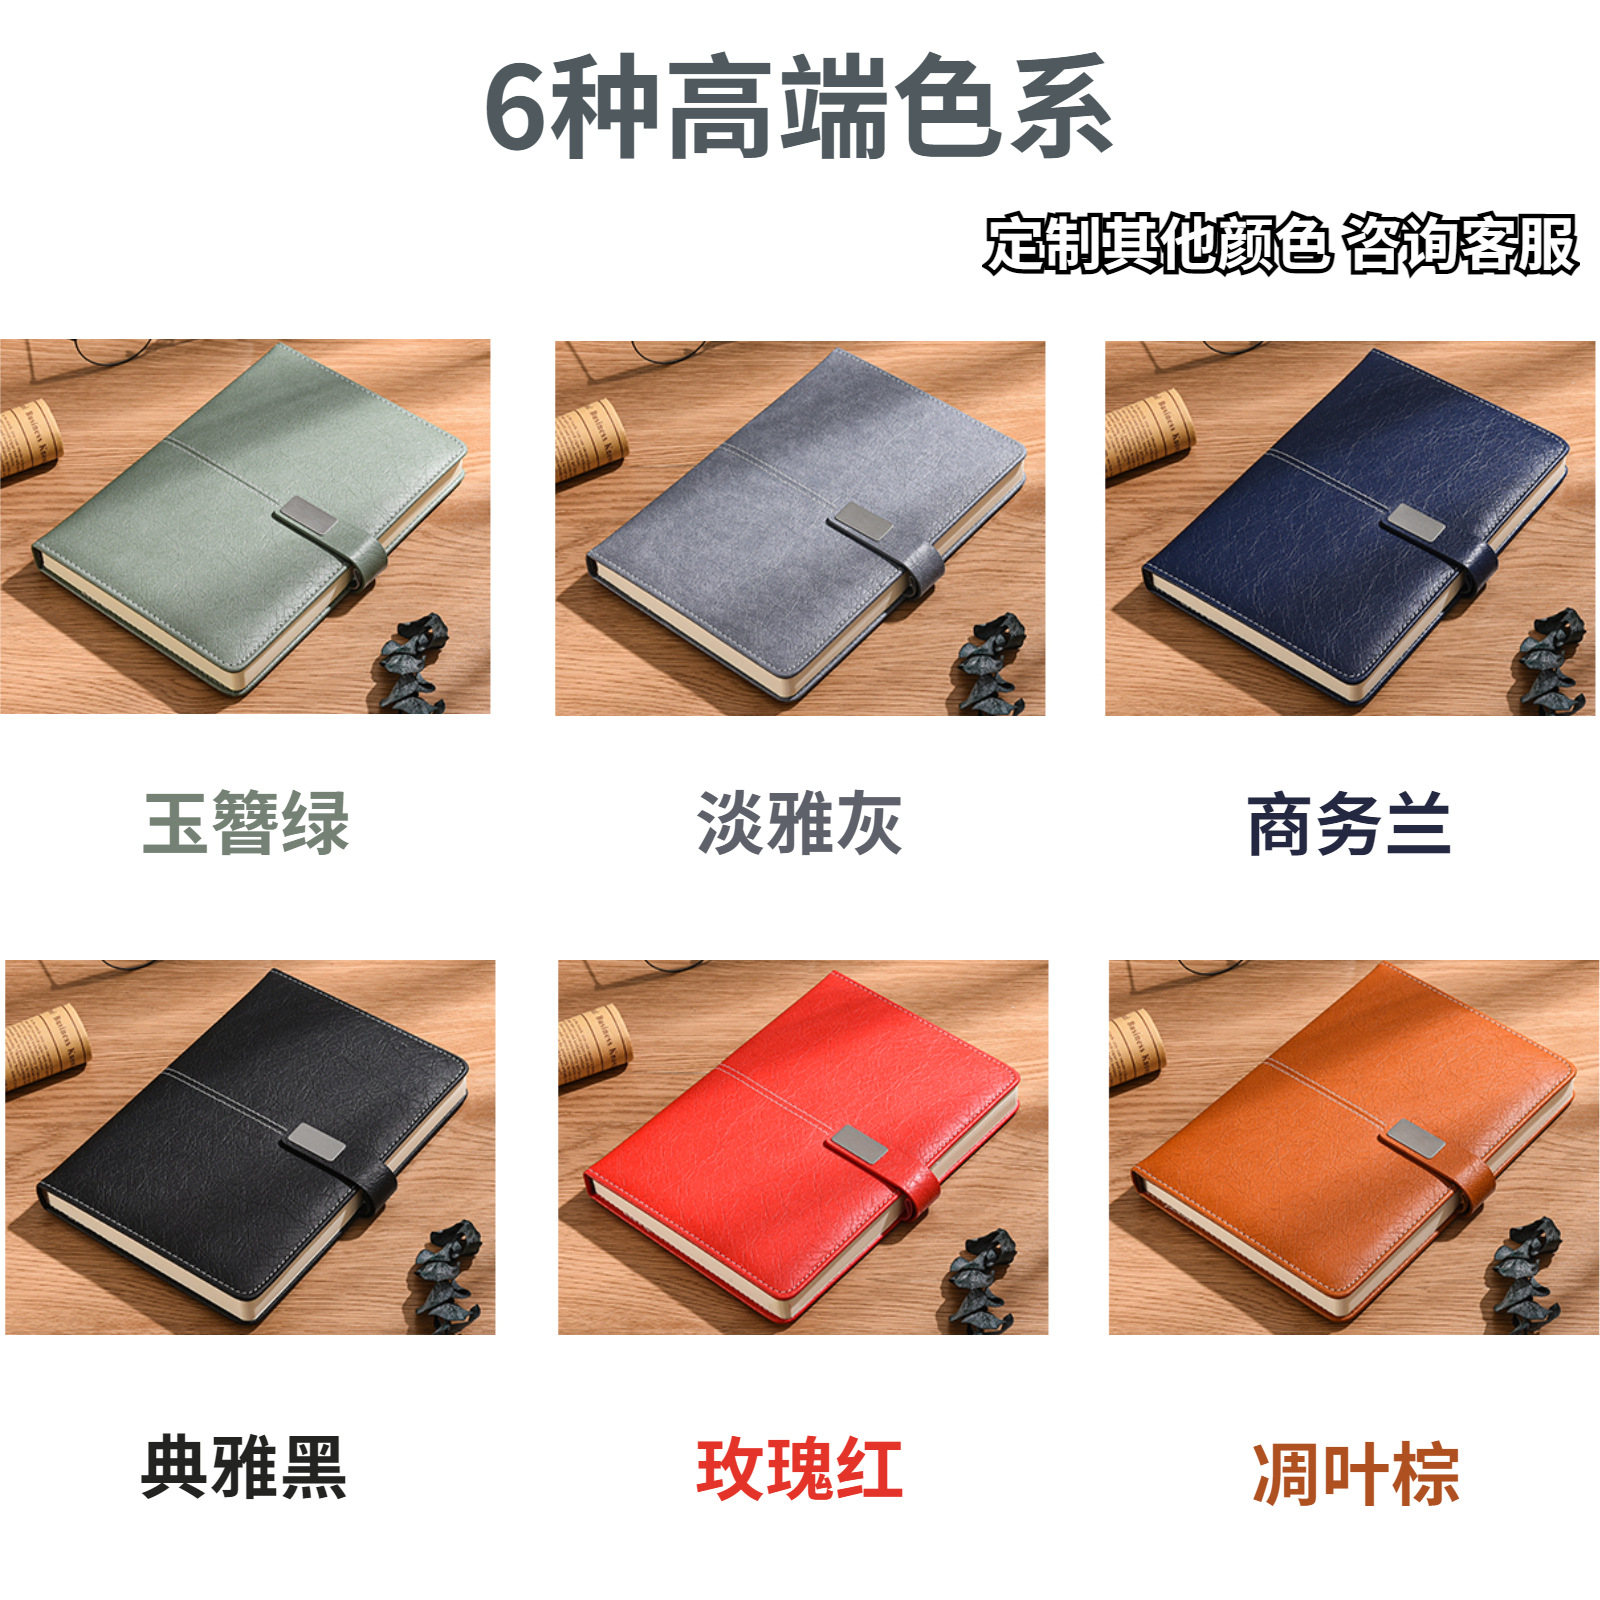 Customized A5 Business Notebook Gift Set Good-looking High-End Office Notebook Enterprise Annual Meeting Gifts